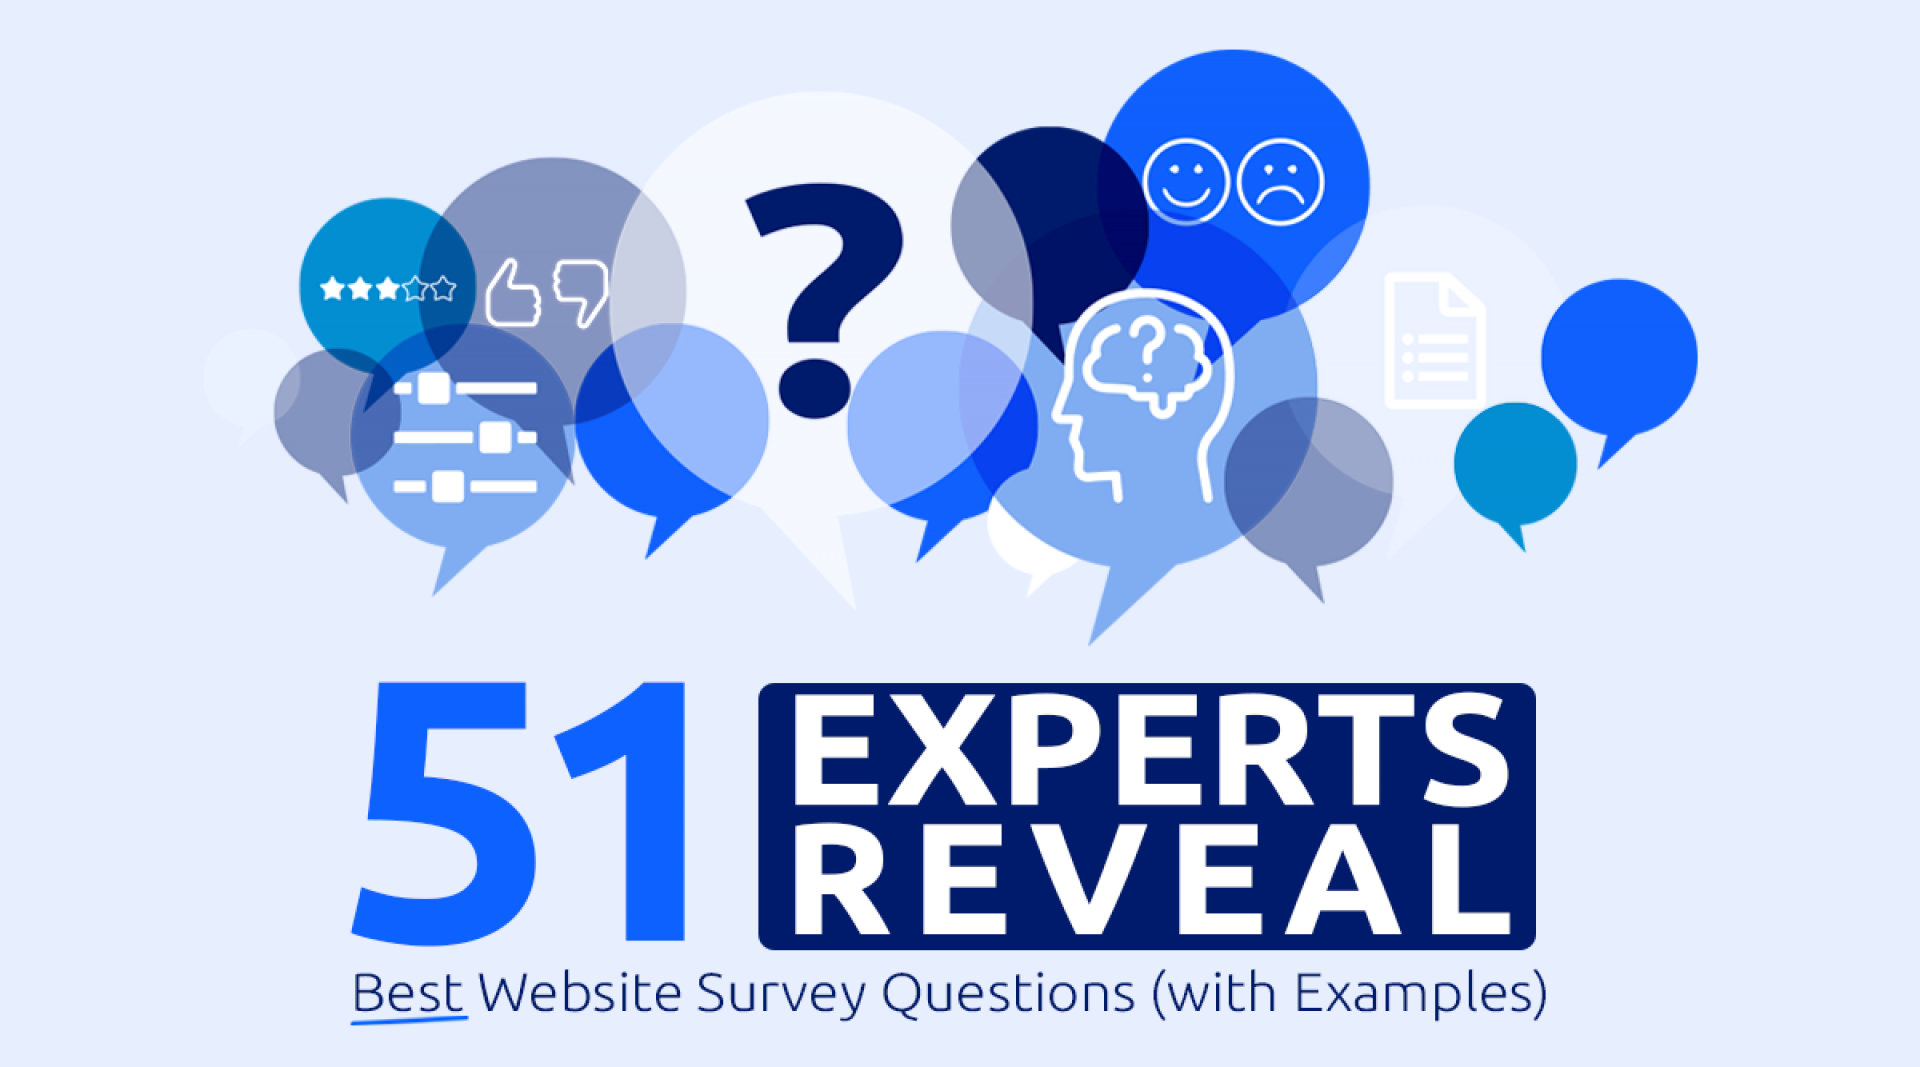 51 Experts Reveal the Best Website Survey Questions to Ask Visitors to Improve Usability [with Examples]